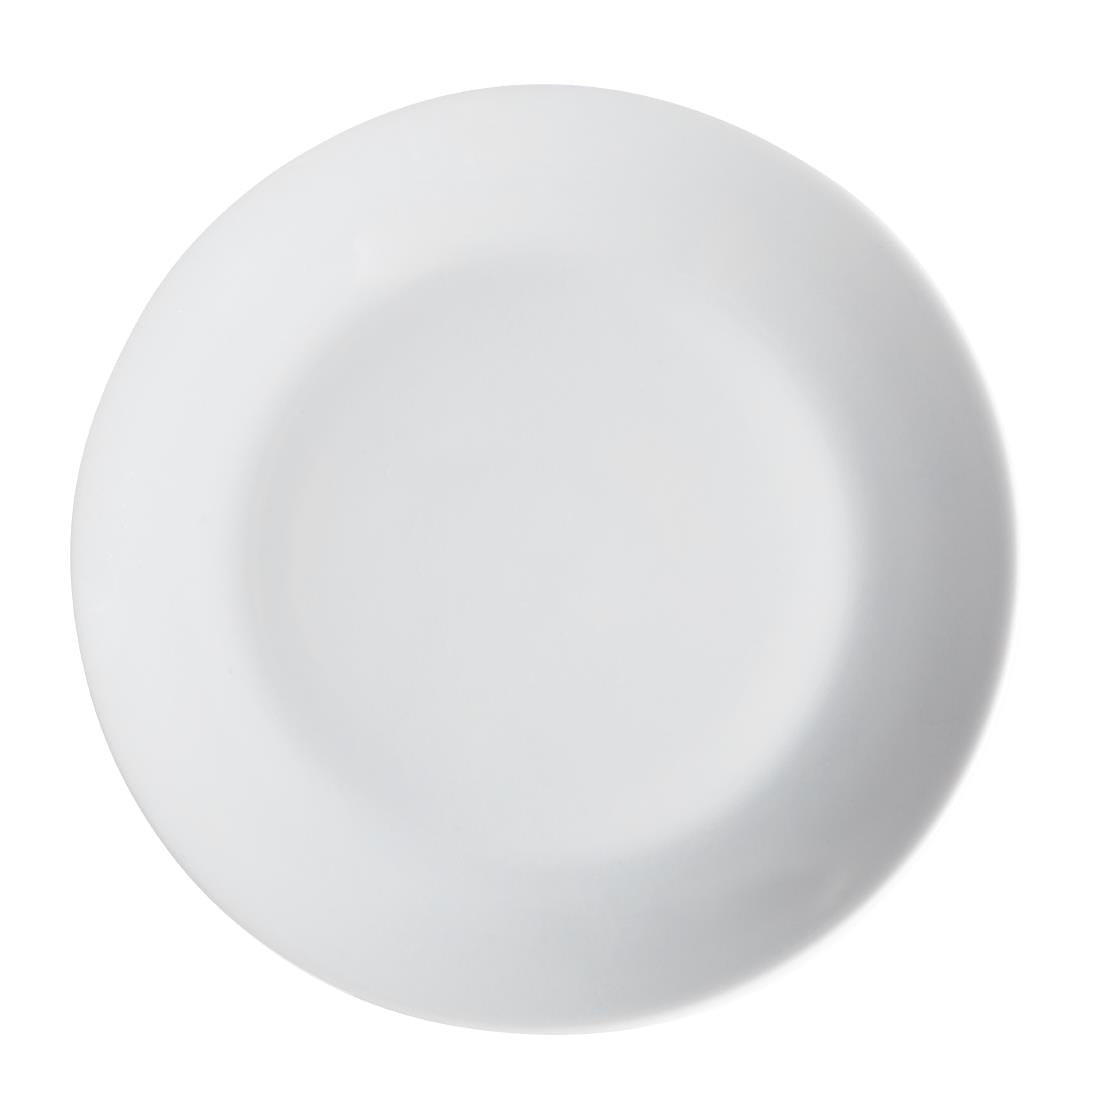 Royal Porcelain Classic White Coupe Plates 210mm (Pack of 12)